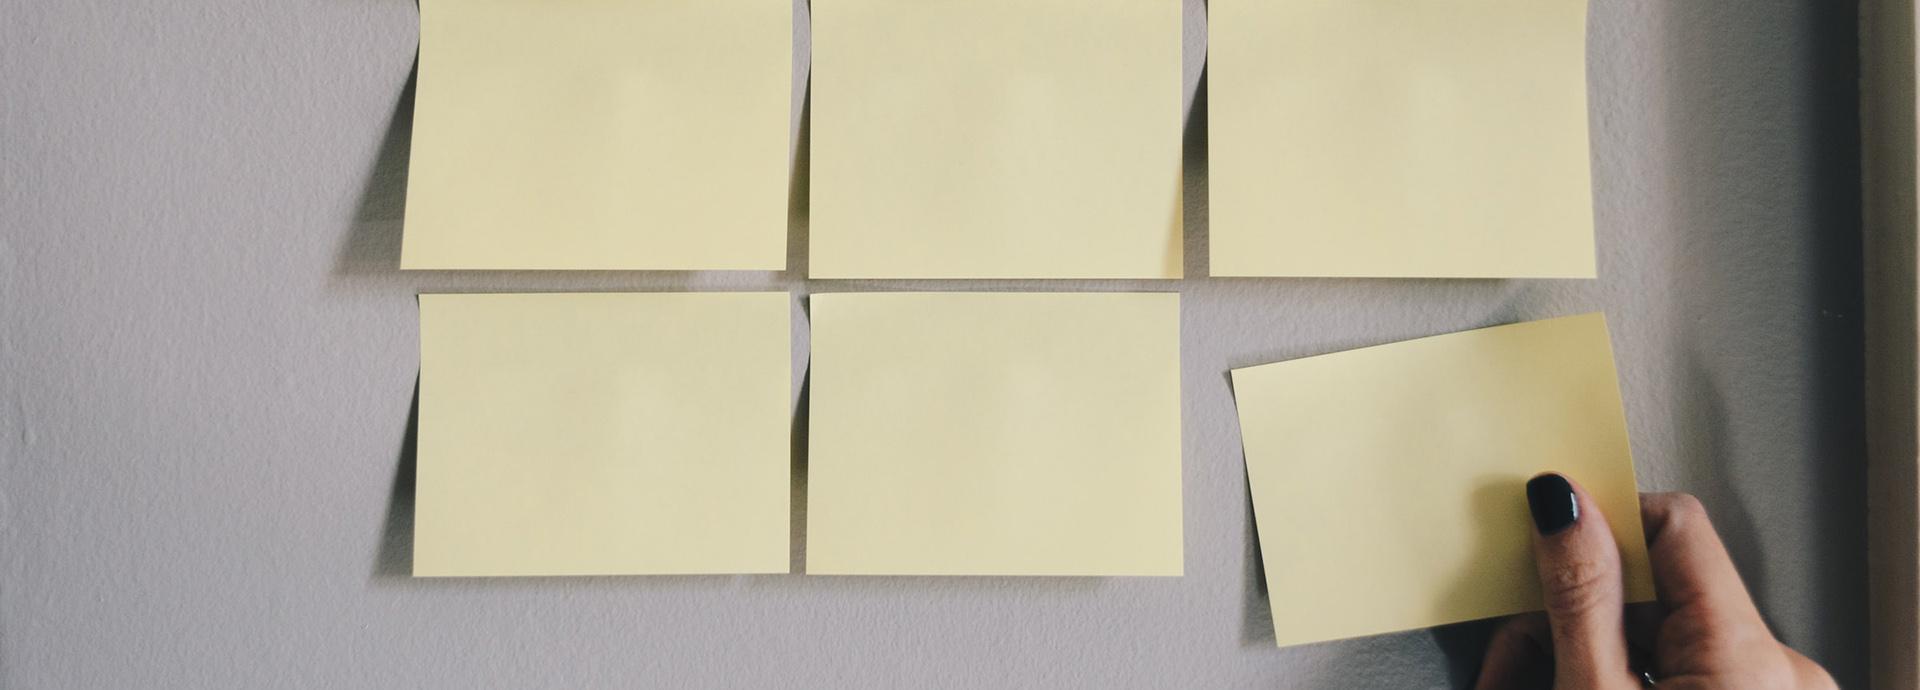 Six light yellow sticky notes on a wall. The note in the lower right-hand corner is being pulled out by a hand that has black nail polish.